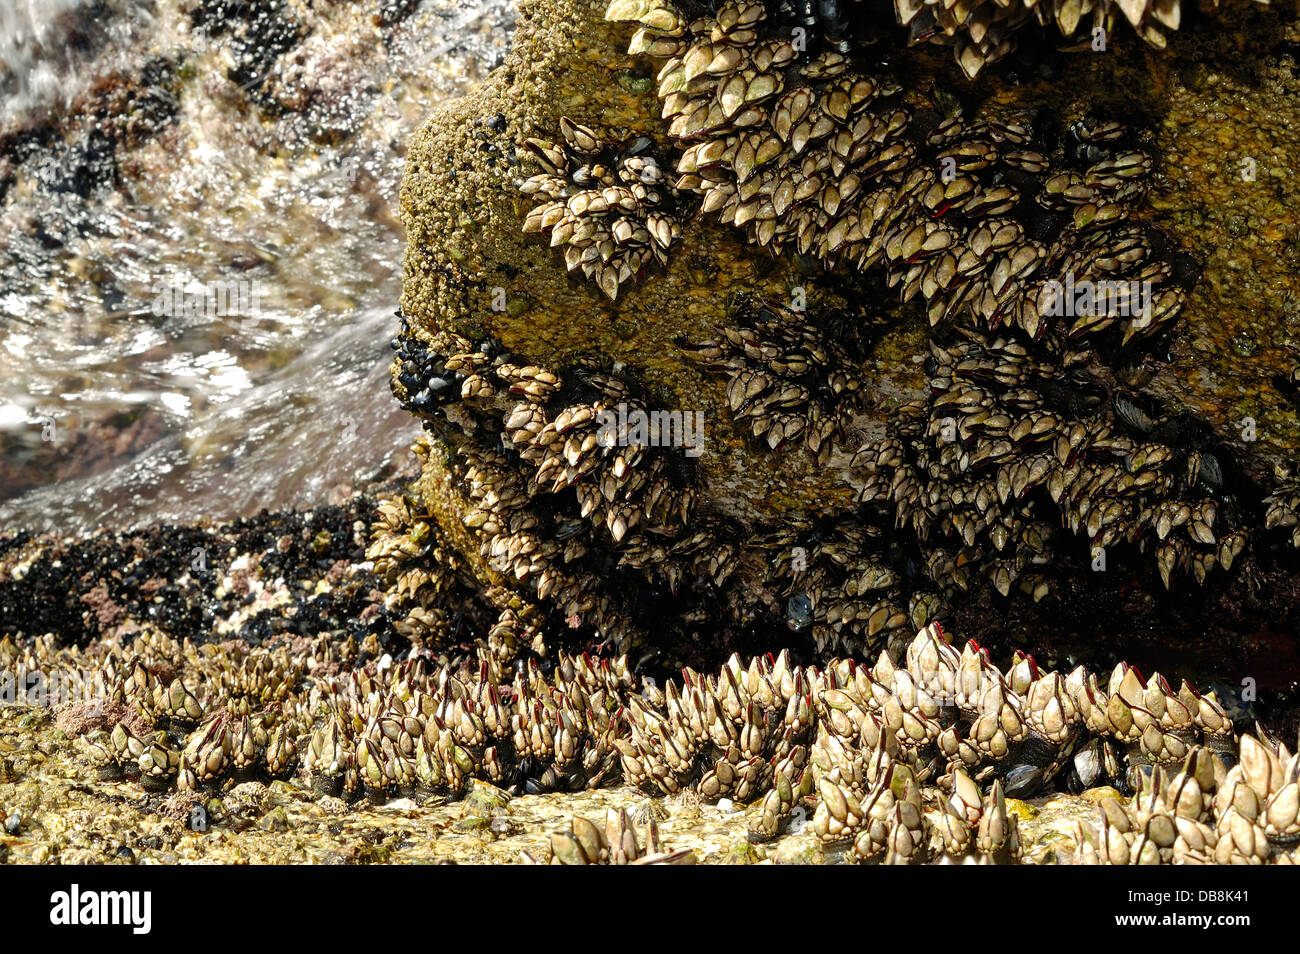 Coastal rocks covered in goose barnacles (pollicipes pollicipes) and other shellfish Stock Photo